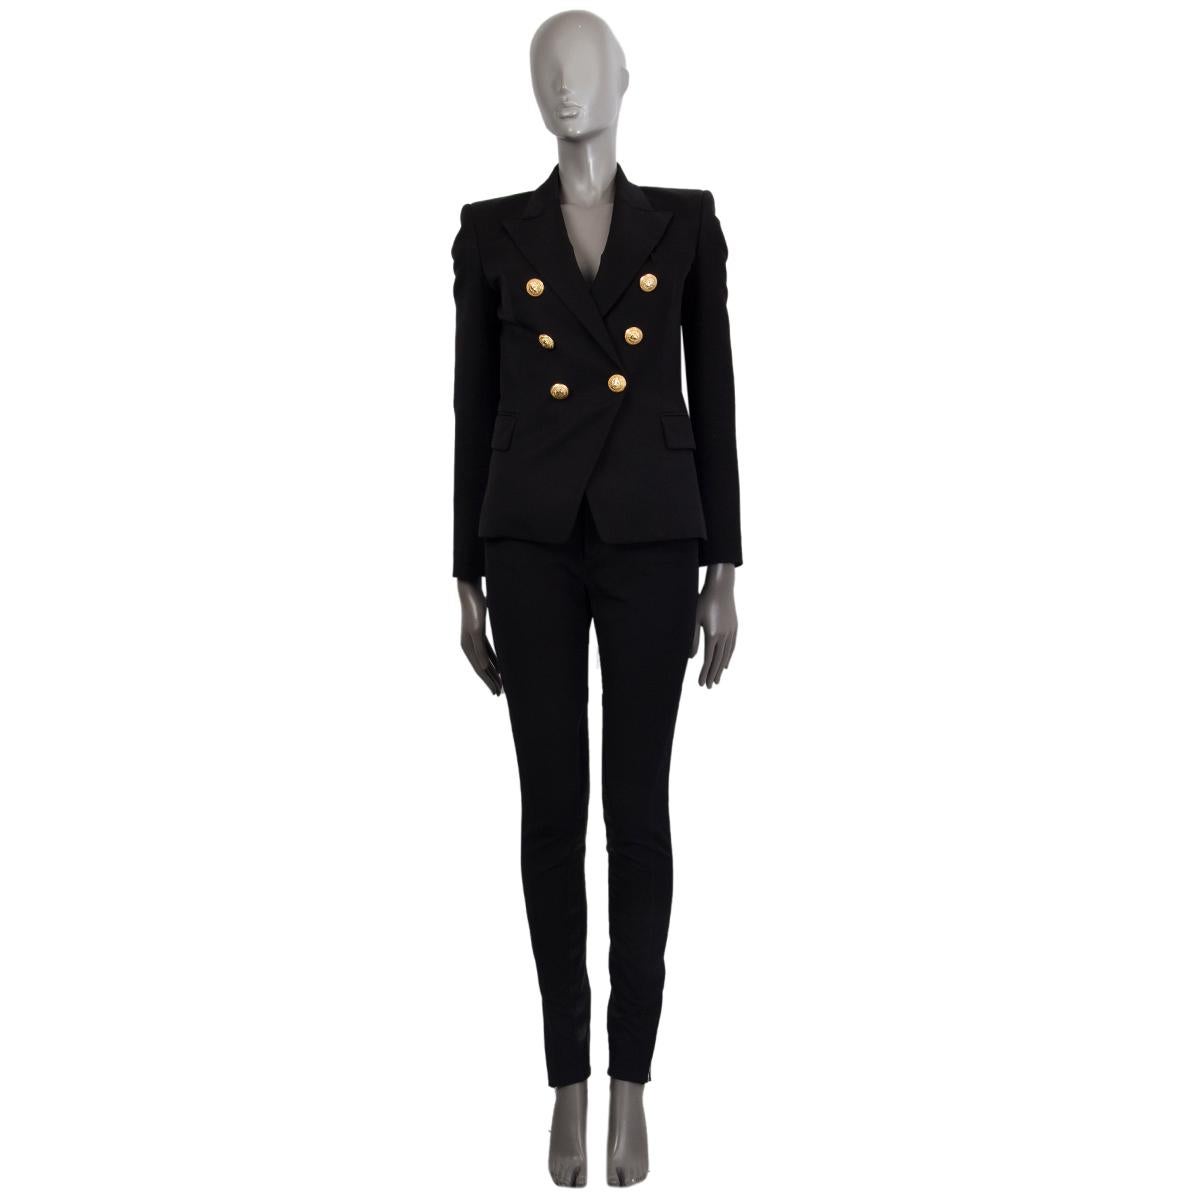 Balmain signature double-breasted blazer in black wool (100%) with gold-tone lion head buttons. Two flap pockets and a chest pocket on the front. Lined in viscose (52%) and cotton (48%). Has been worn and is in excellent condition.

Tag Size 36
Size